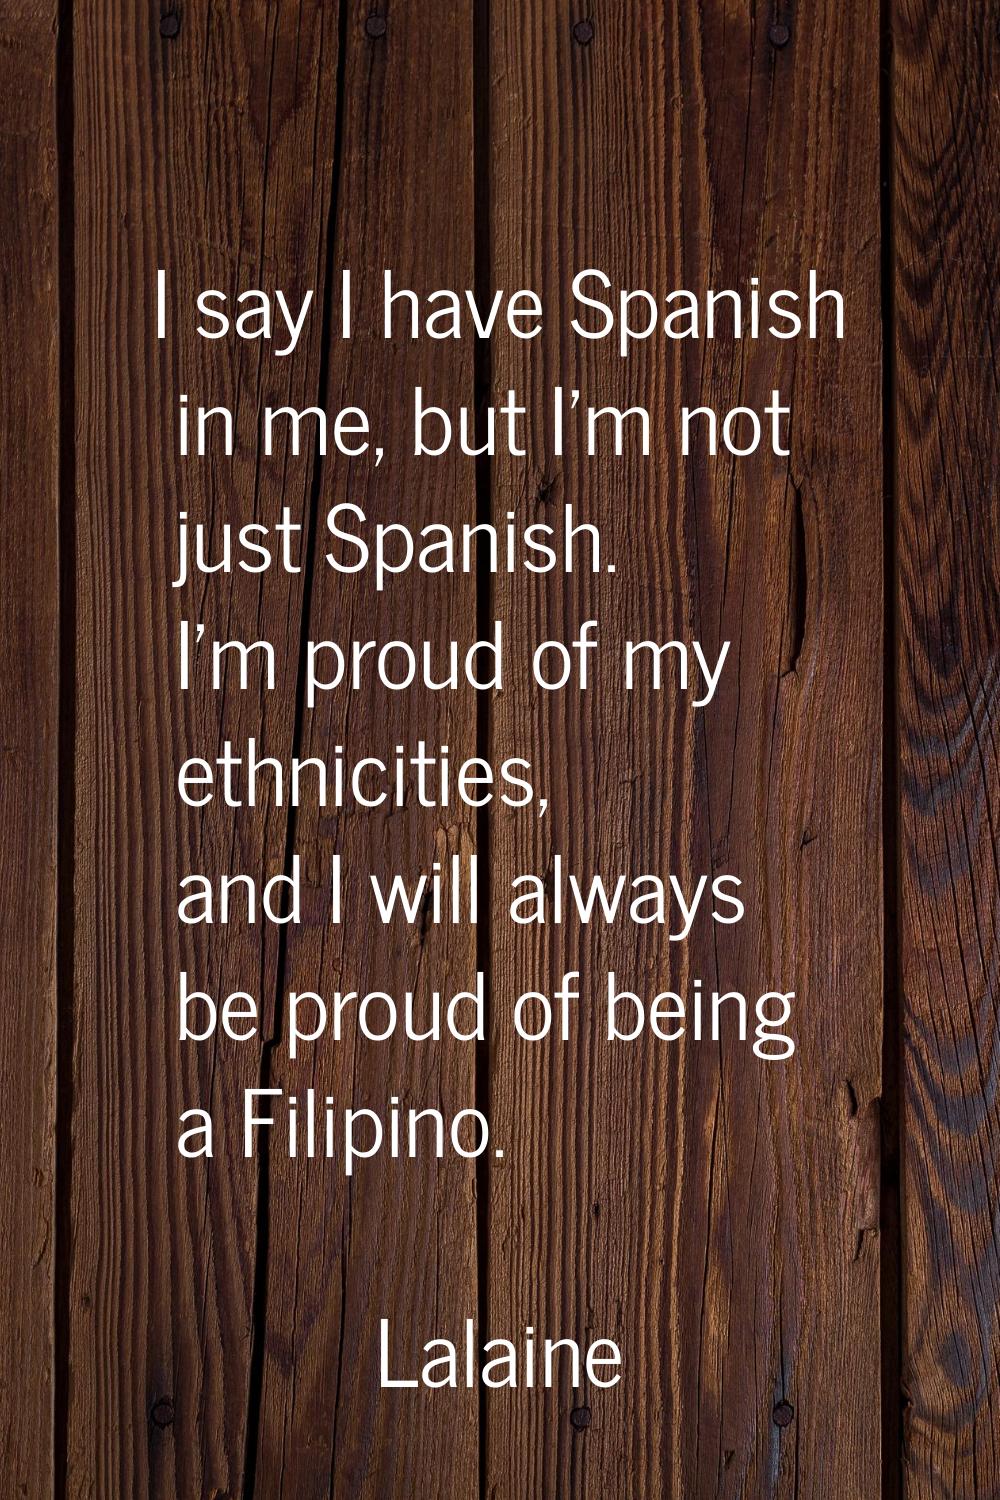 I say I have Spanish in me, but I'm not just Spanish. I'm proud of my ethnicities, and I will alway